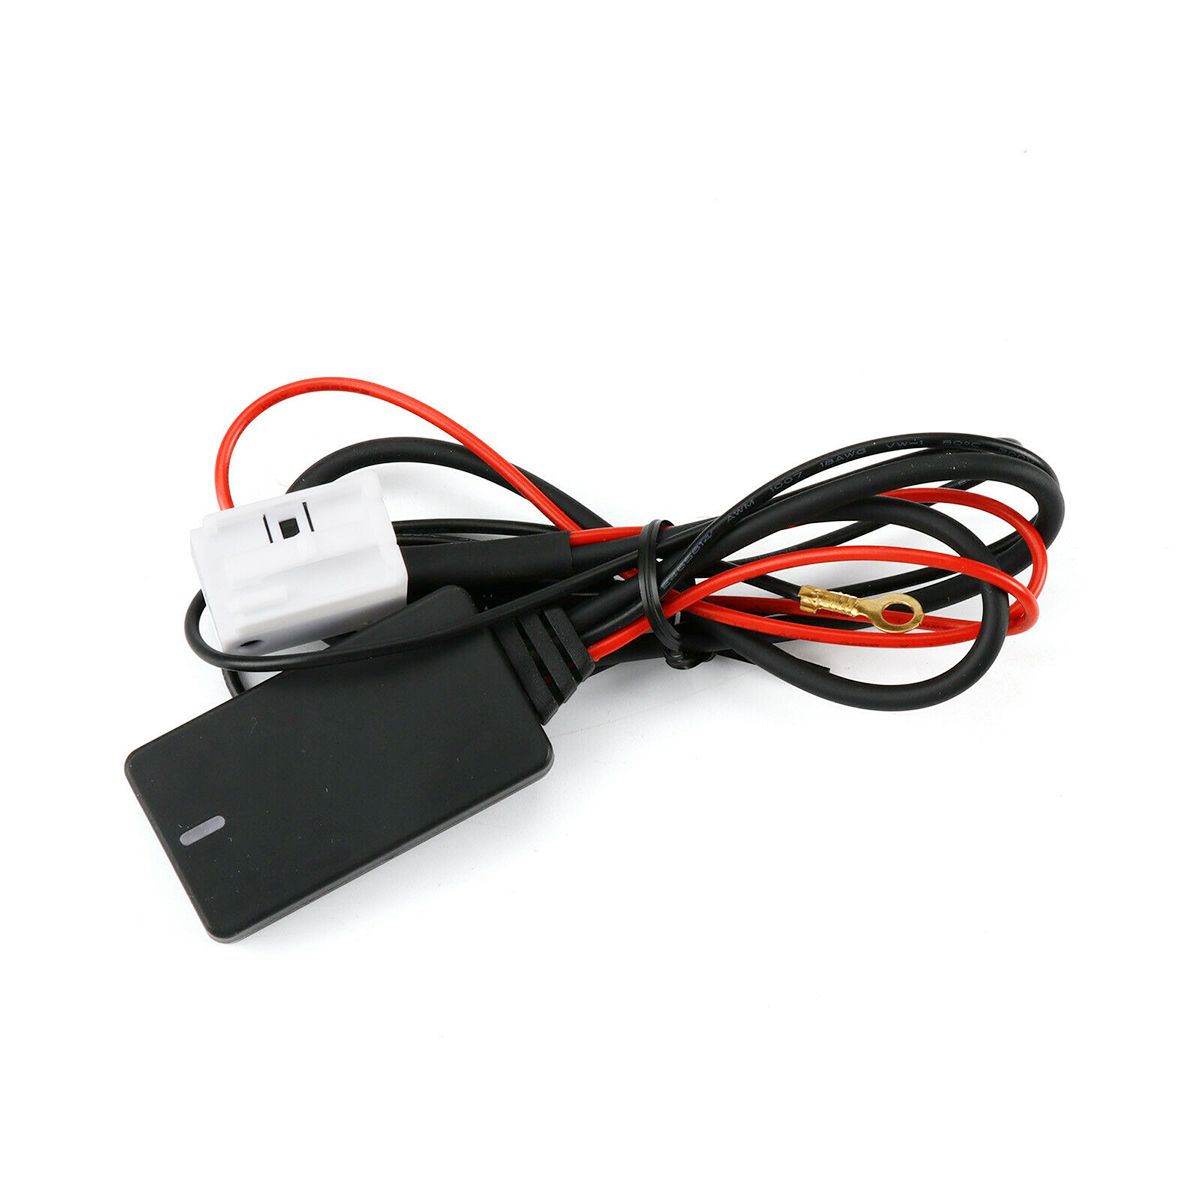 Aux-Bluetooth-Adapter-Car-MP3-Jack-Music-For-RCD-RNS-210-310-510-315-Golf-R32-1617366